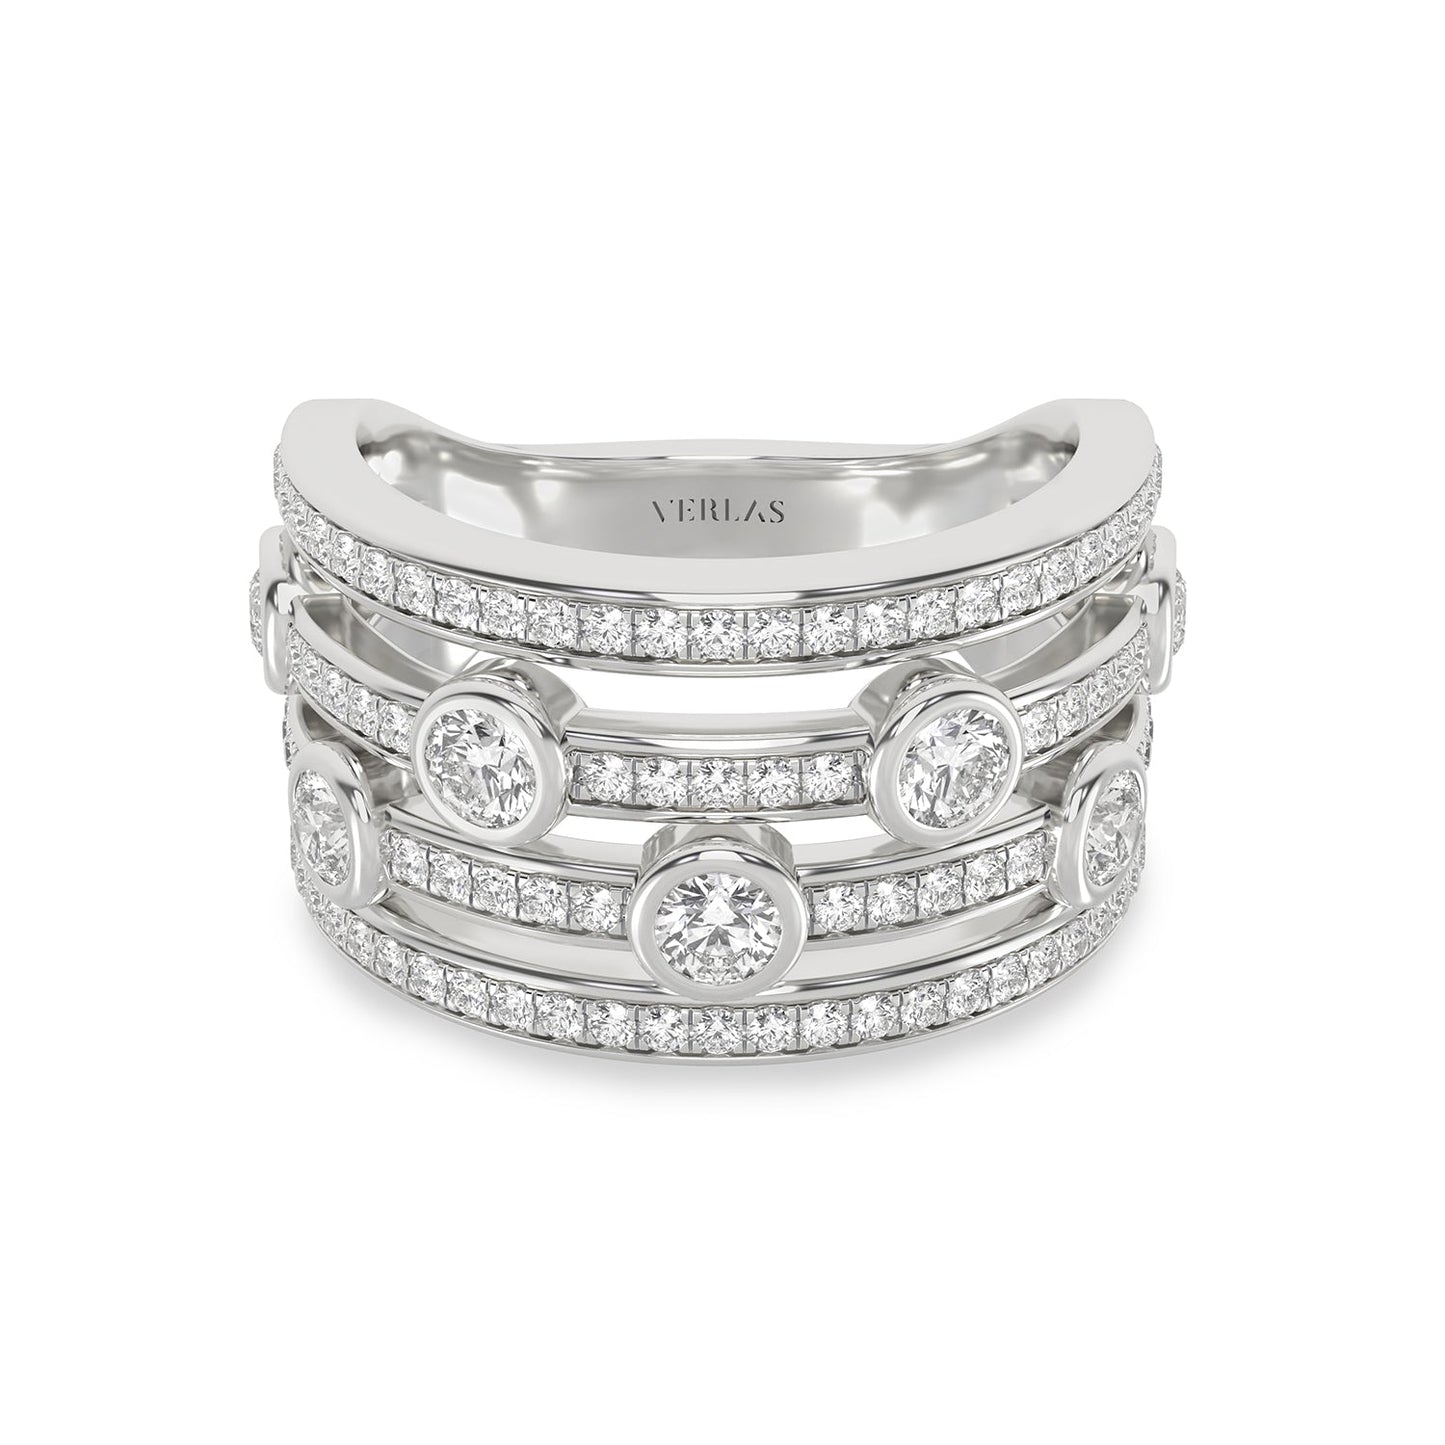 2x2 Tier Smitten Ring_Product Angle_1 Ct. - 1